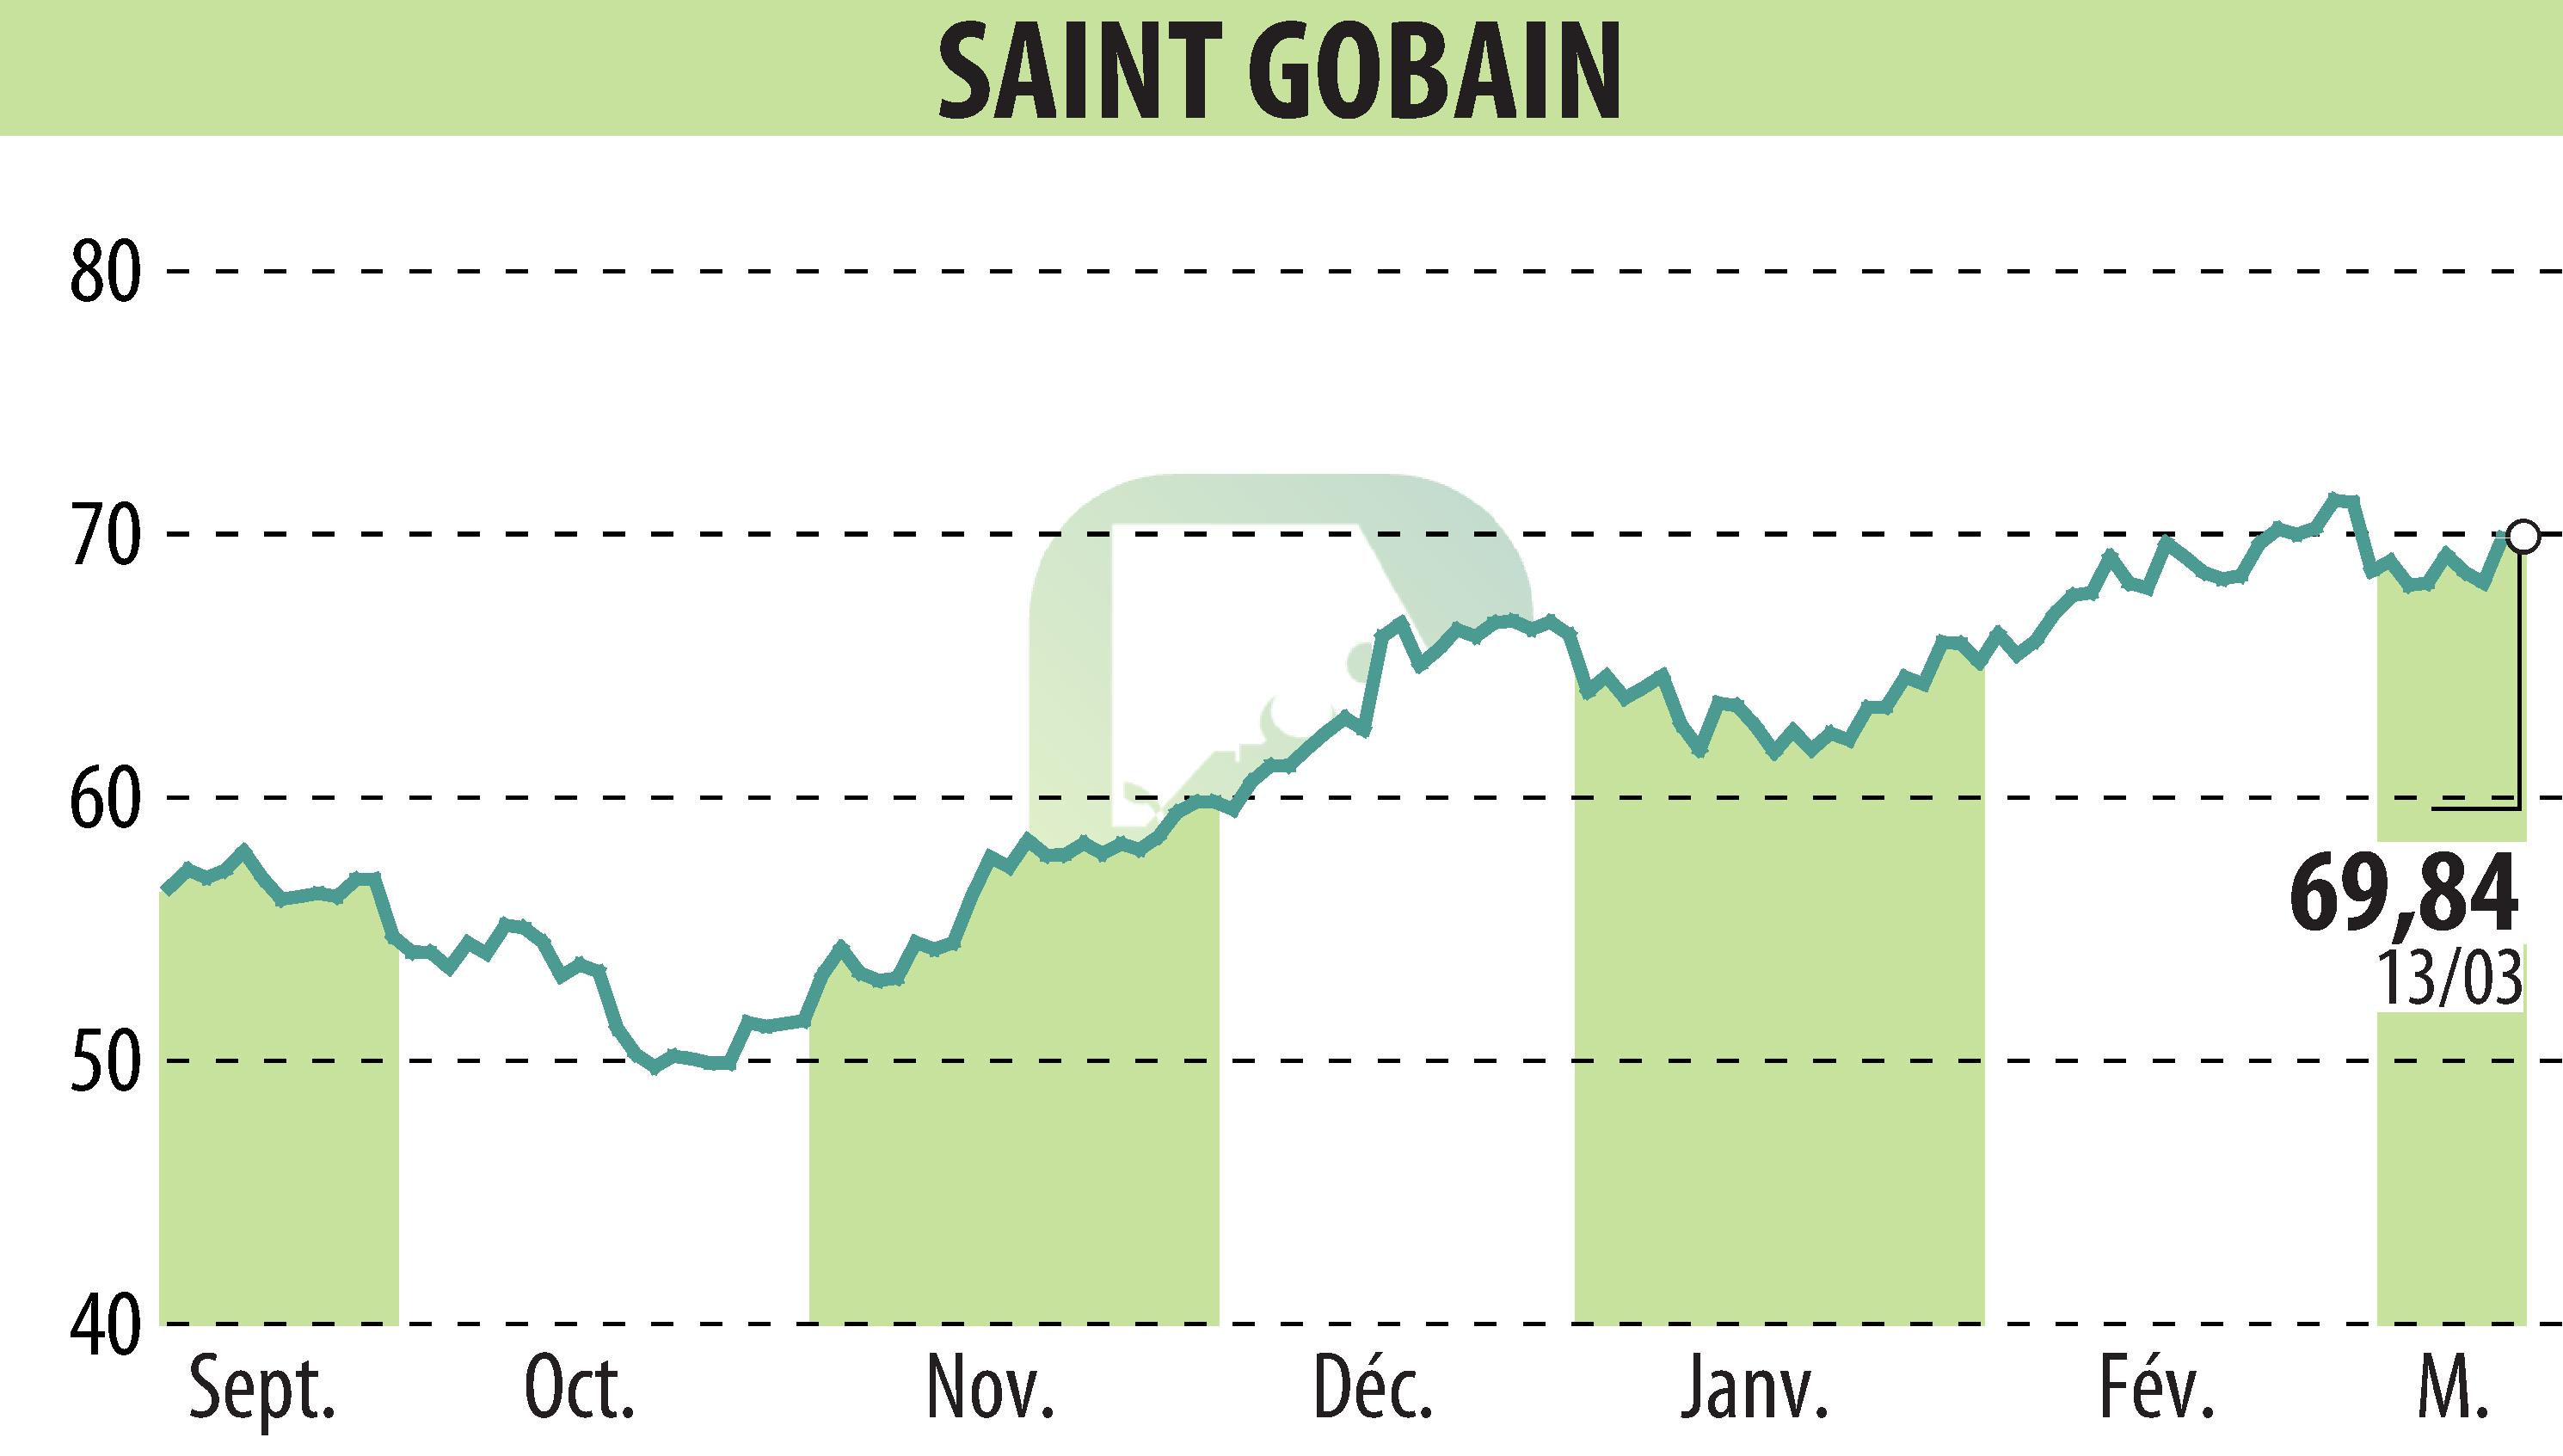 Stock price chart of SAINT-GOBAIN (EPA:SGO) showing fluctuations.